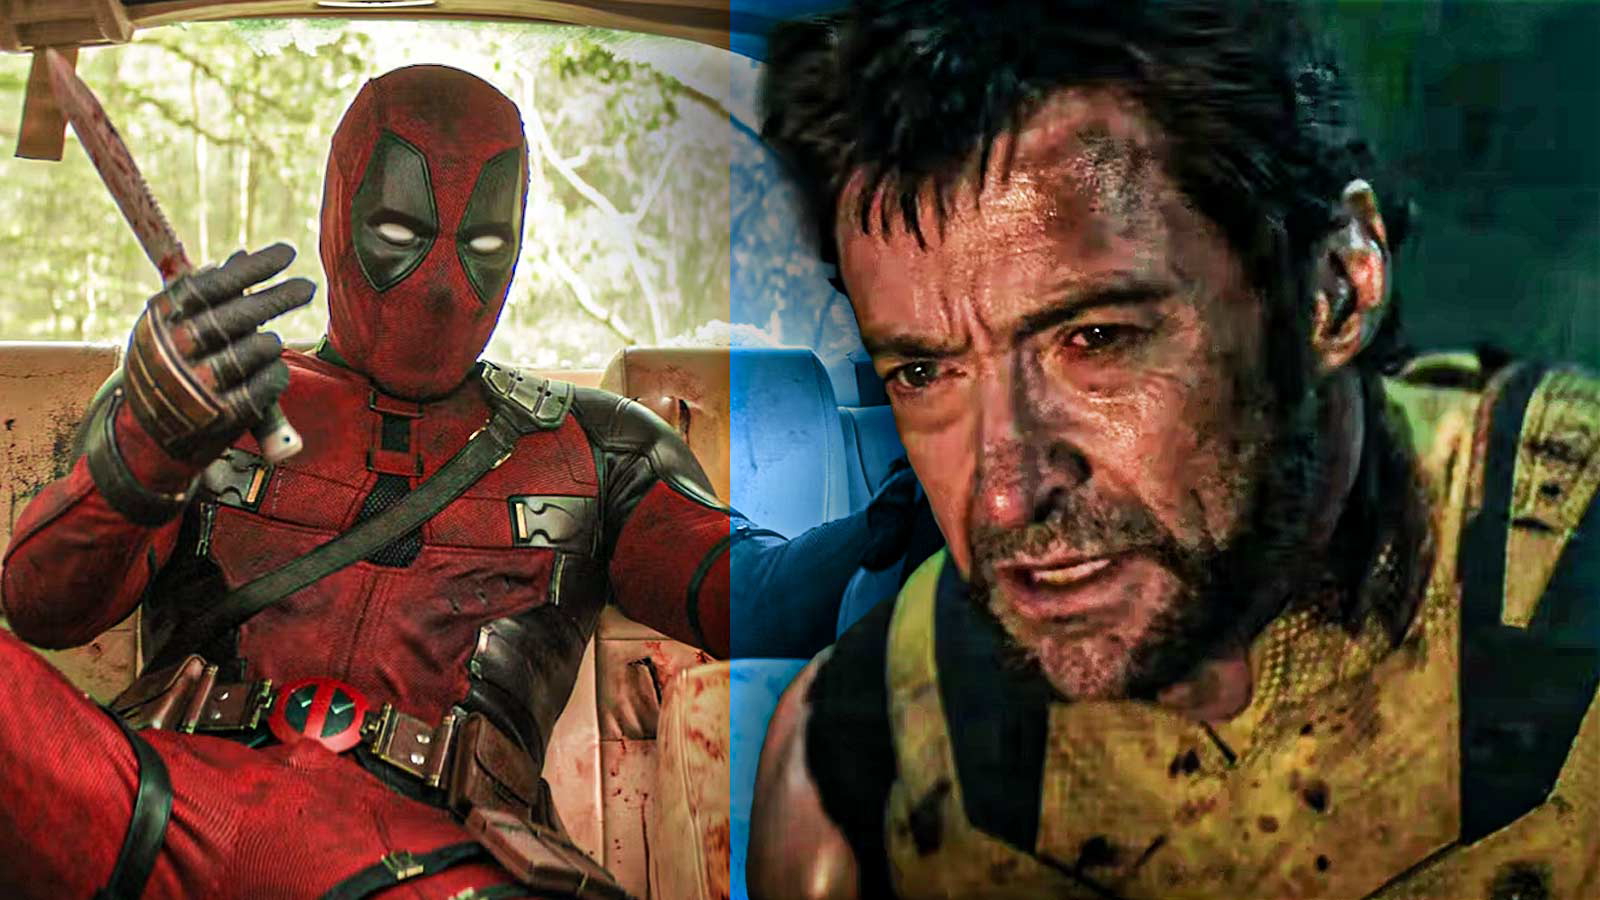 “Don’t deny this is special”: Hugh Jackman Was Left Heartbroken After Ryan Reynolds Refused to Acknowledge Deadpool’s Love for Wolverine